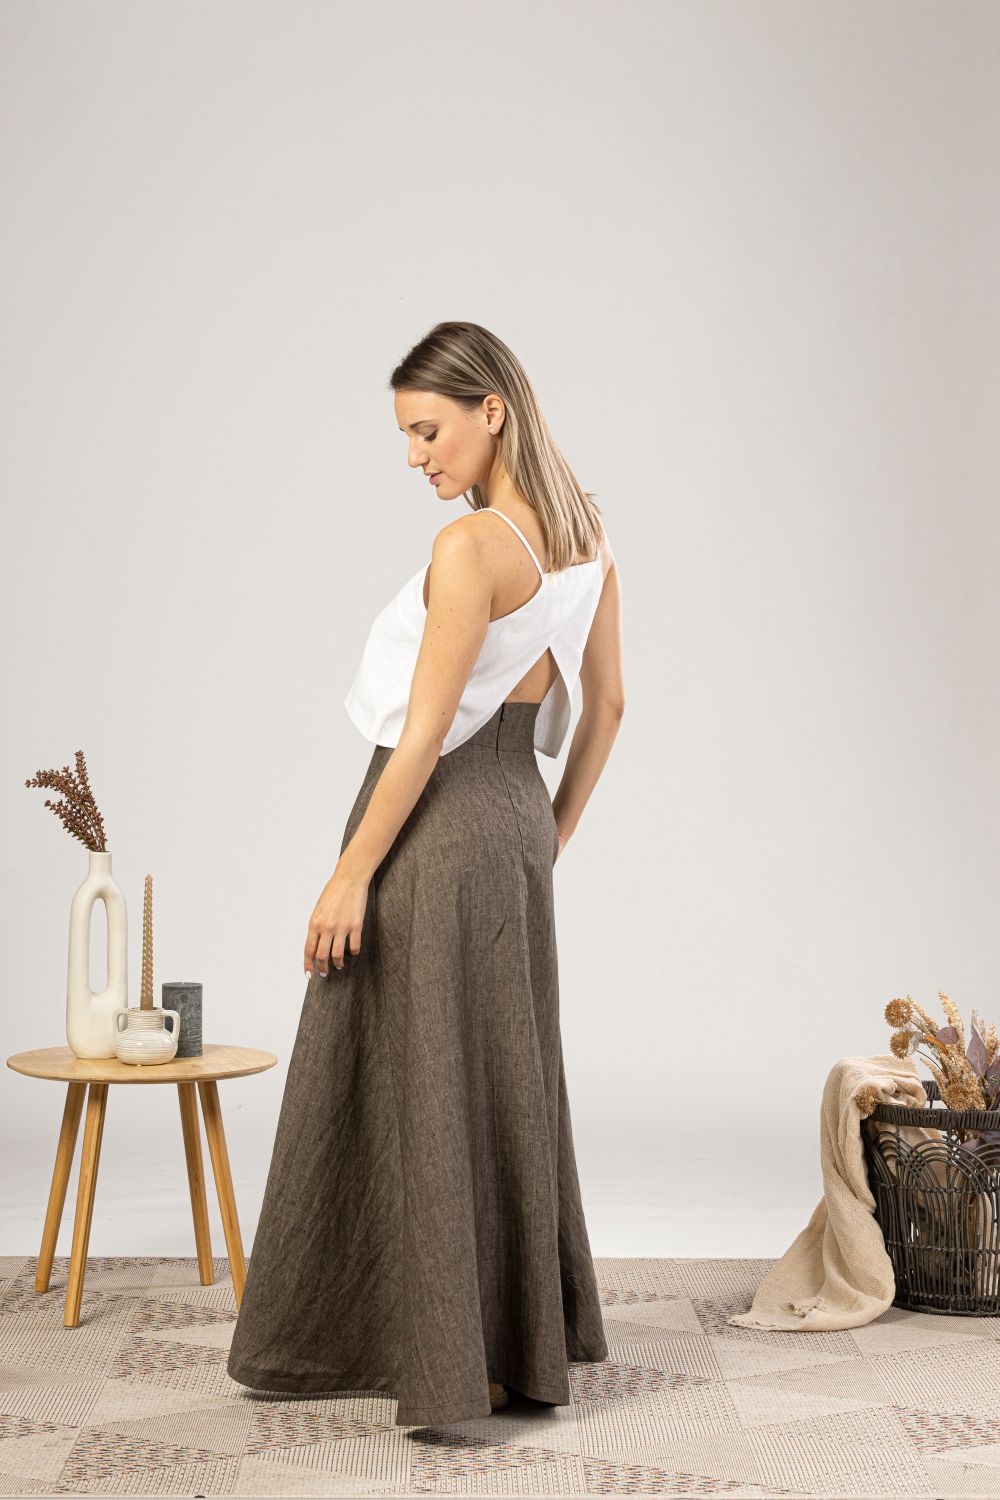 Brown Melange Minimalist High Waist Linen Maxi Skirt ideal for summer outfits - from NikkaPlace | Effortless fashion for easy living